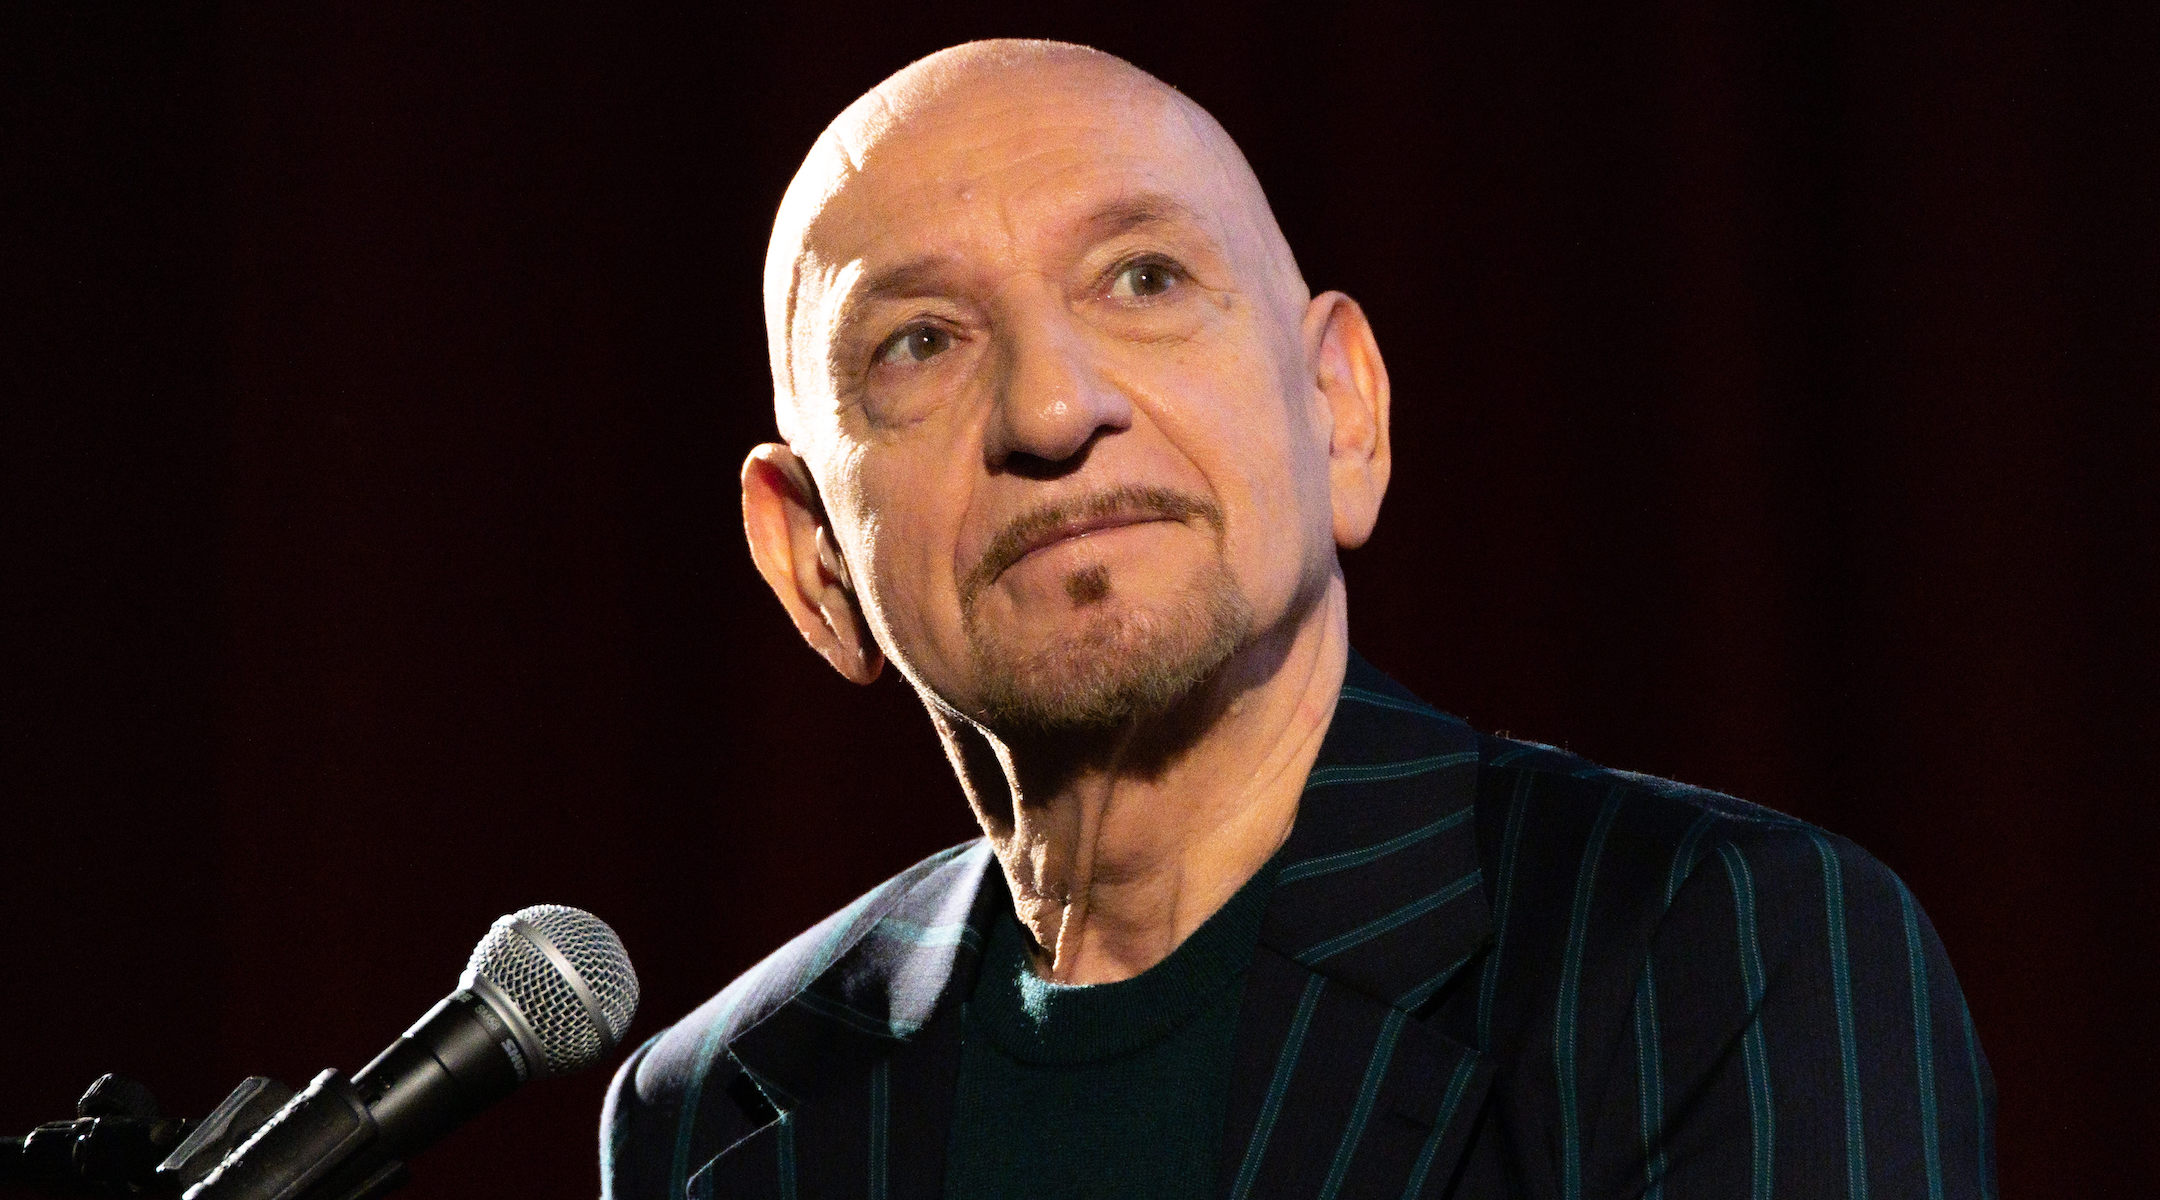 Ben Kingsley participates in a Q&A after a screening of “Dalíland” at Landmark’s Nuart Theatre in Los Angeles, June 10, 2023. (Elyse Jankowski/Getty Images)